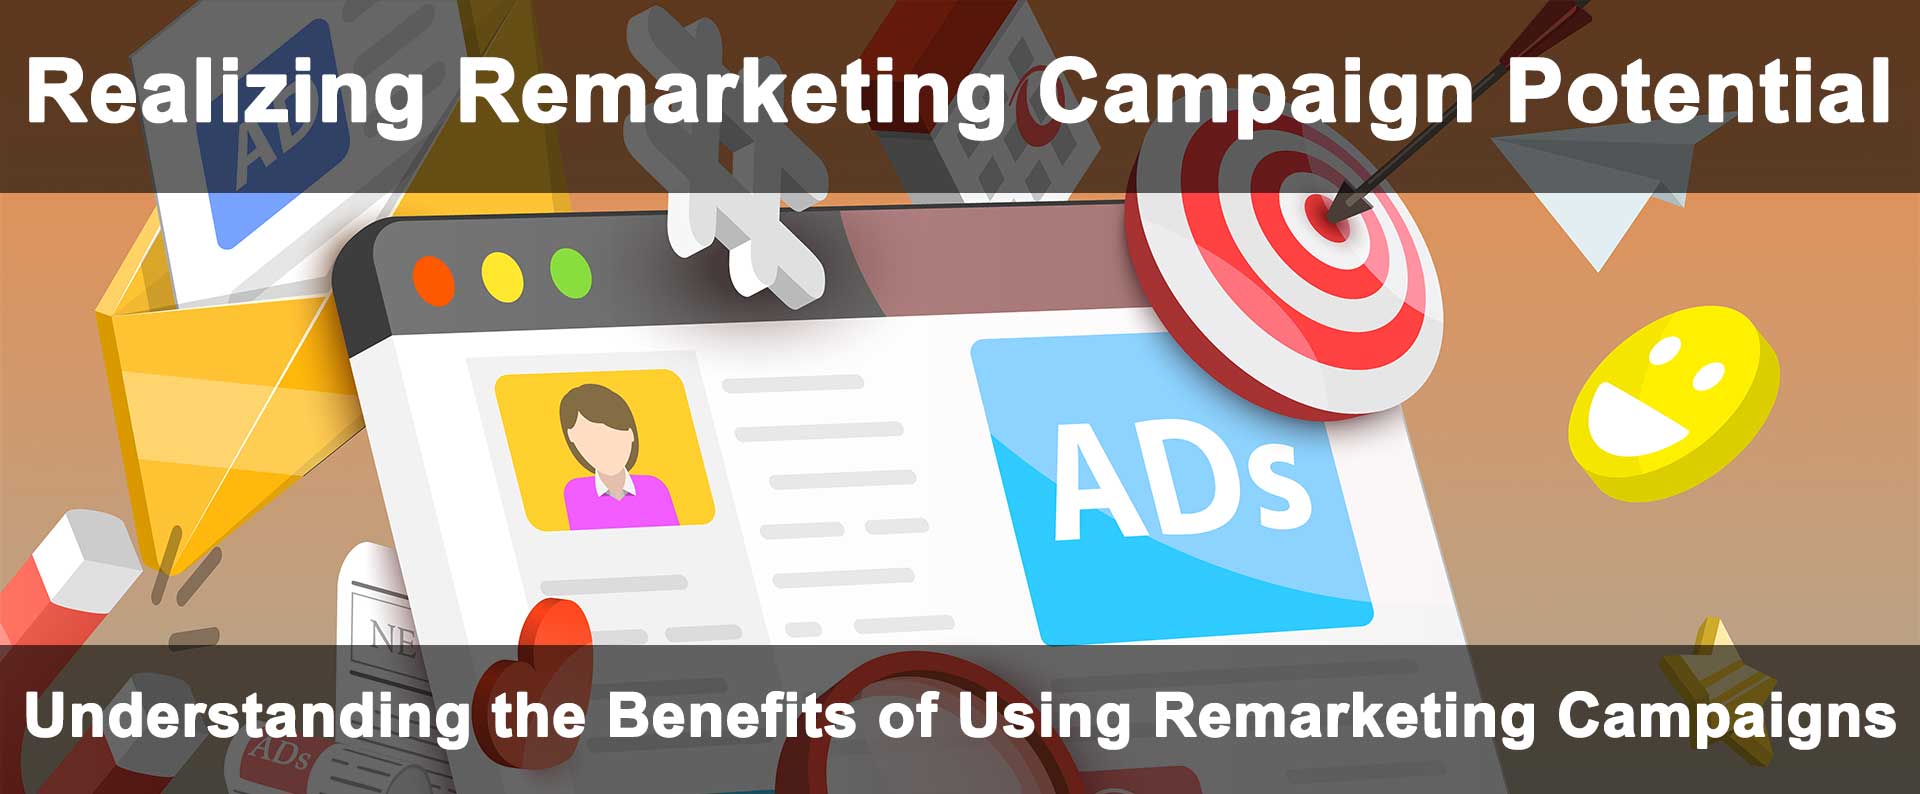 Realizing Remarketing Campaign Potential